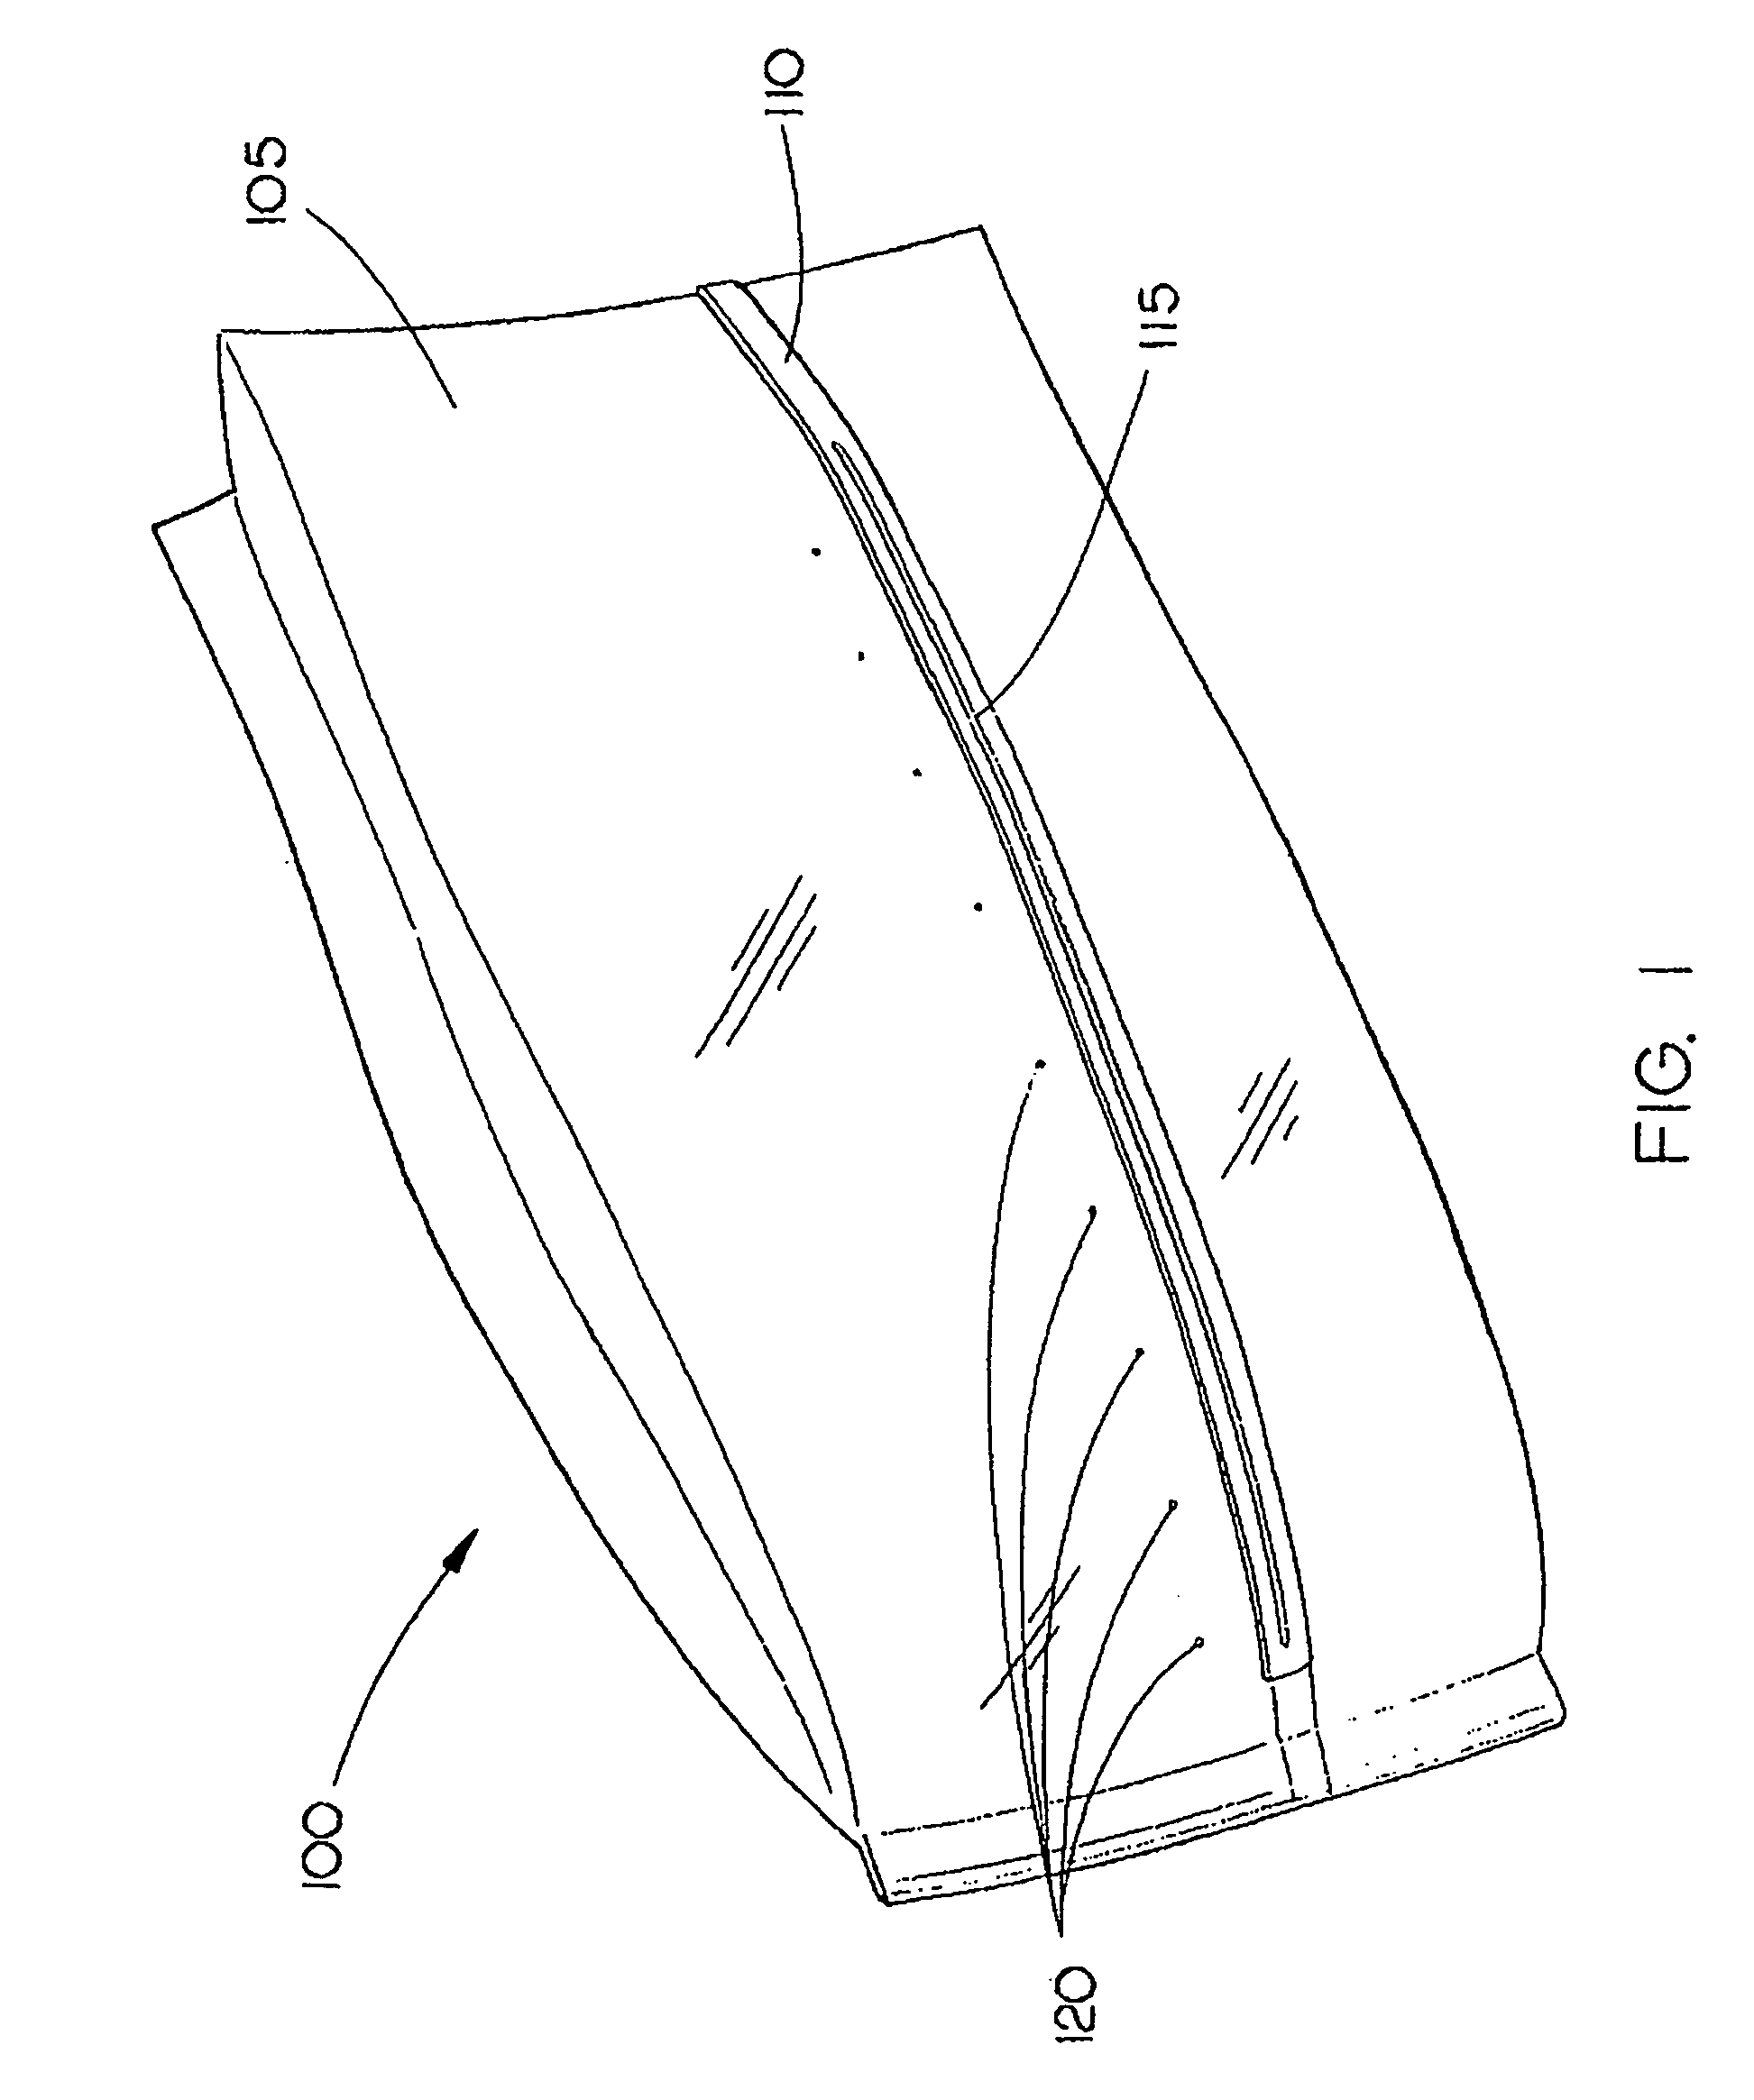 Packaging material and method for microwave and steam cooking of food products